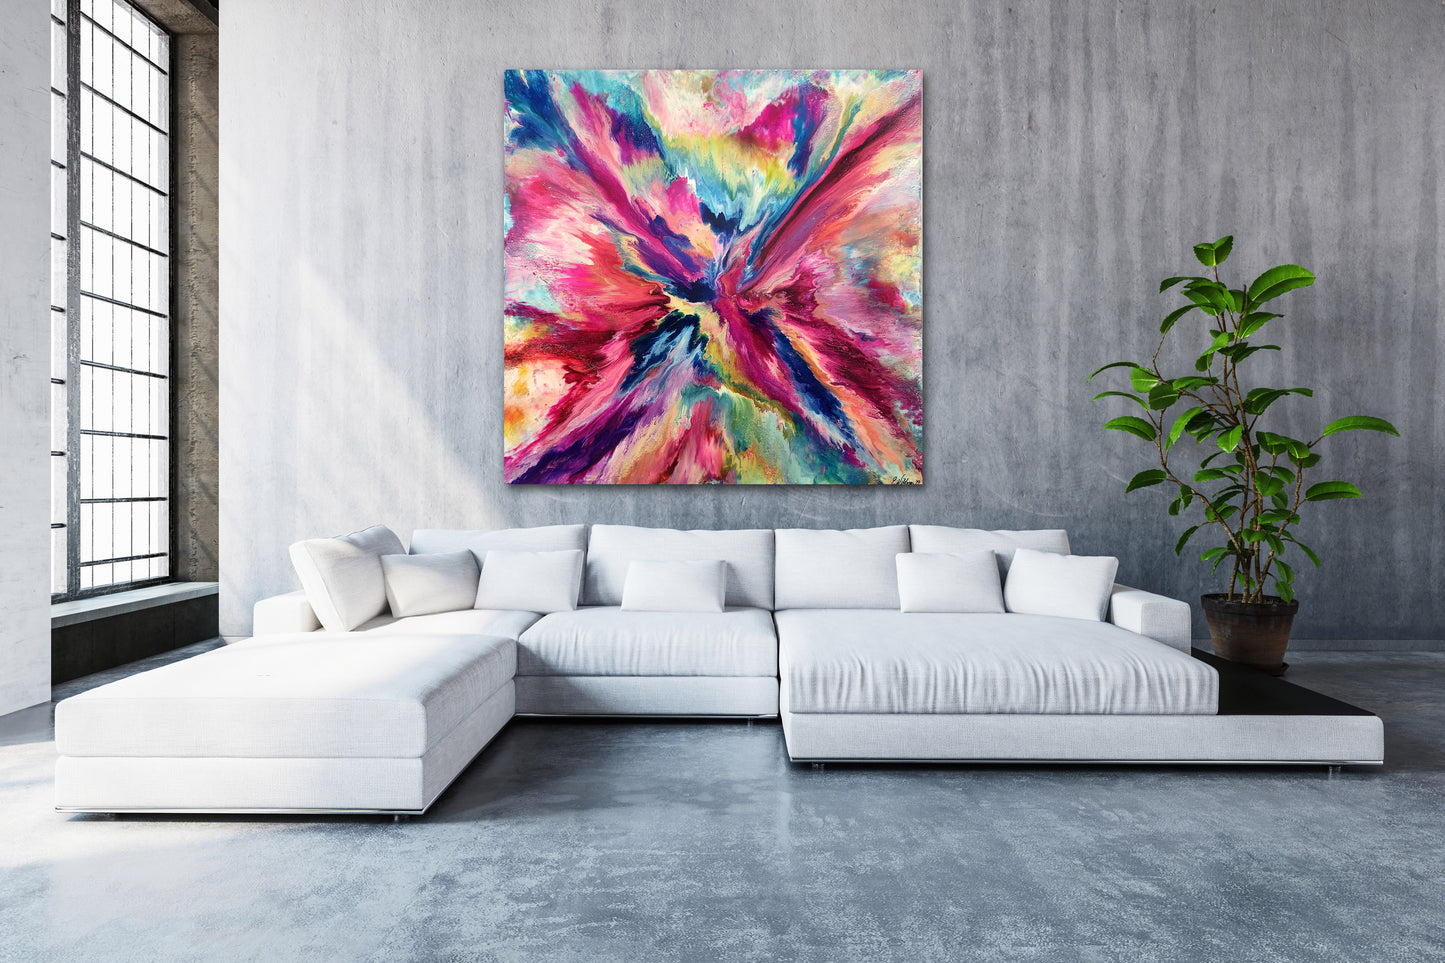 Soaring to Utopia 60" X 60" - SOLD